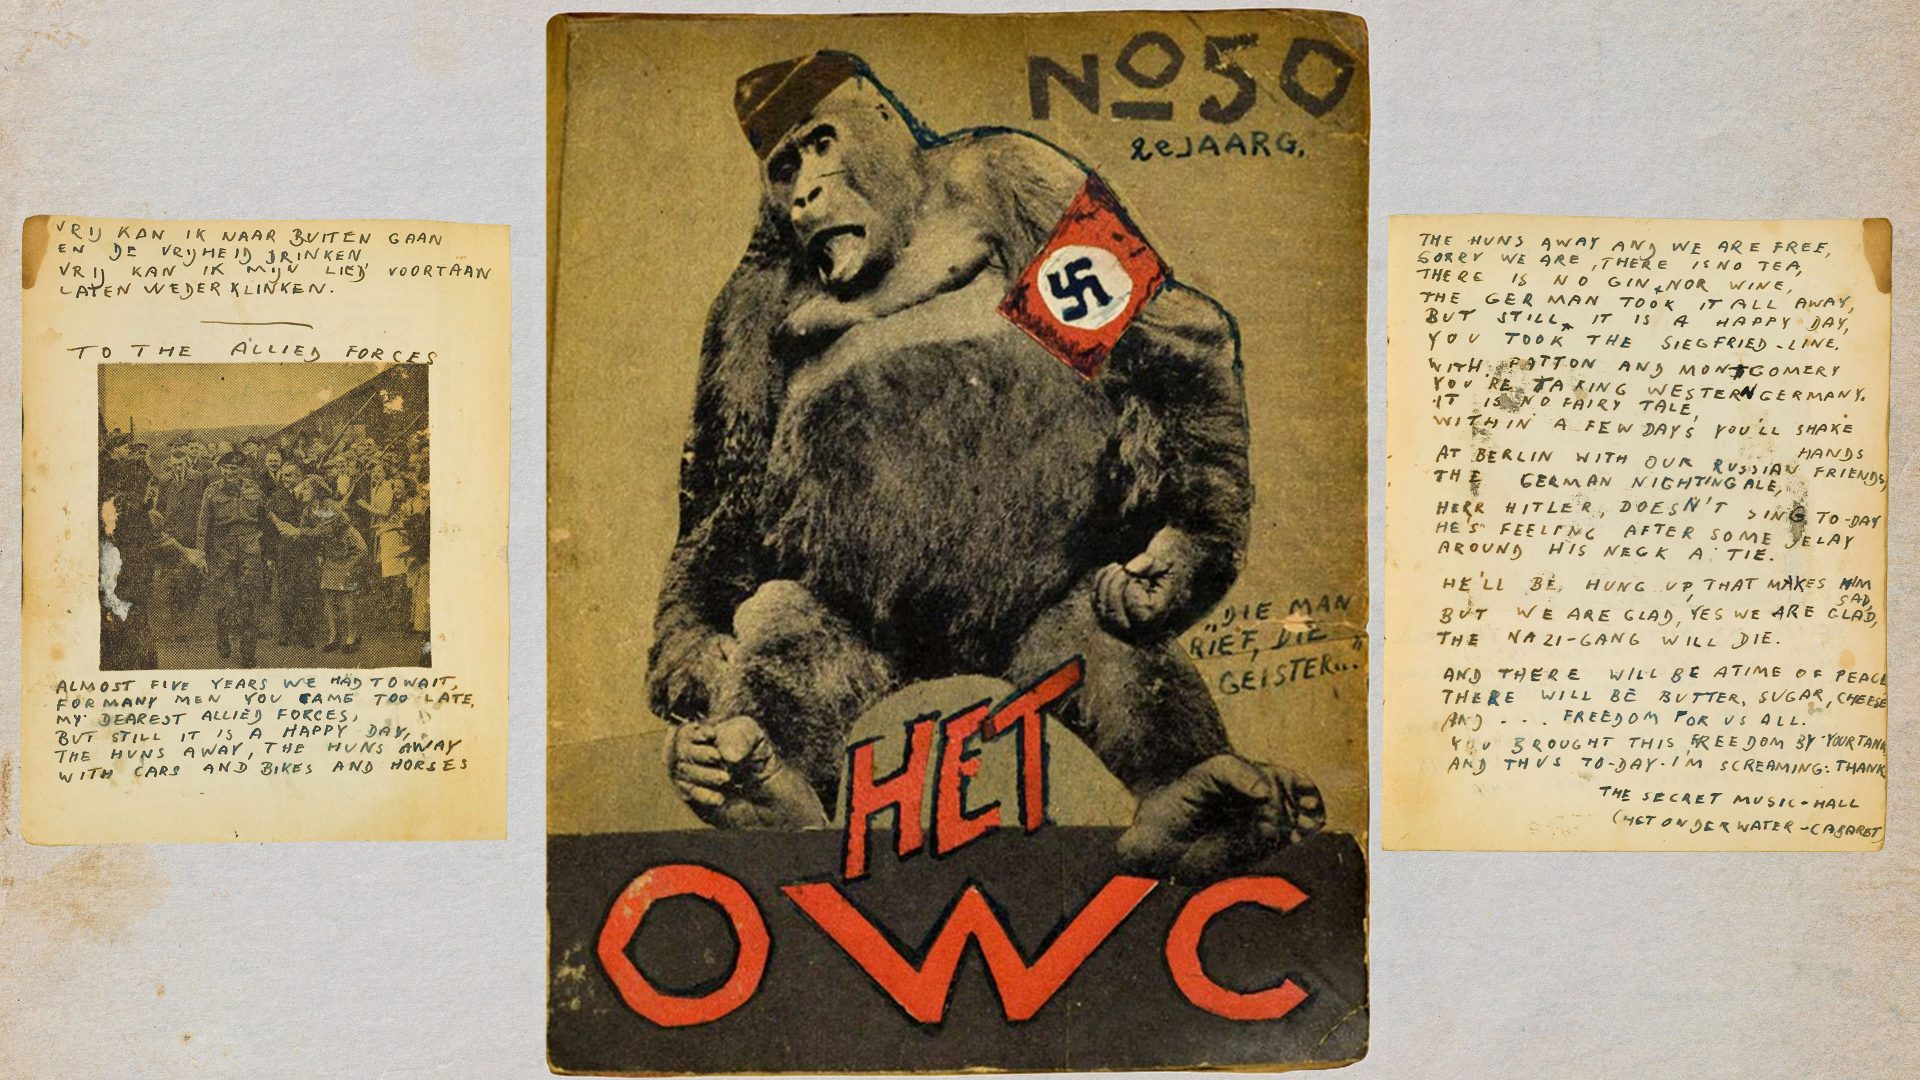 The covers for Het Onderwater Cabaret were collages created by Curt Bloch from the limited materials available. The final issue featured a poem titled ‘To The Allied Forces’. Photos: Jewish Museum Berlin